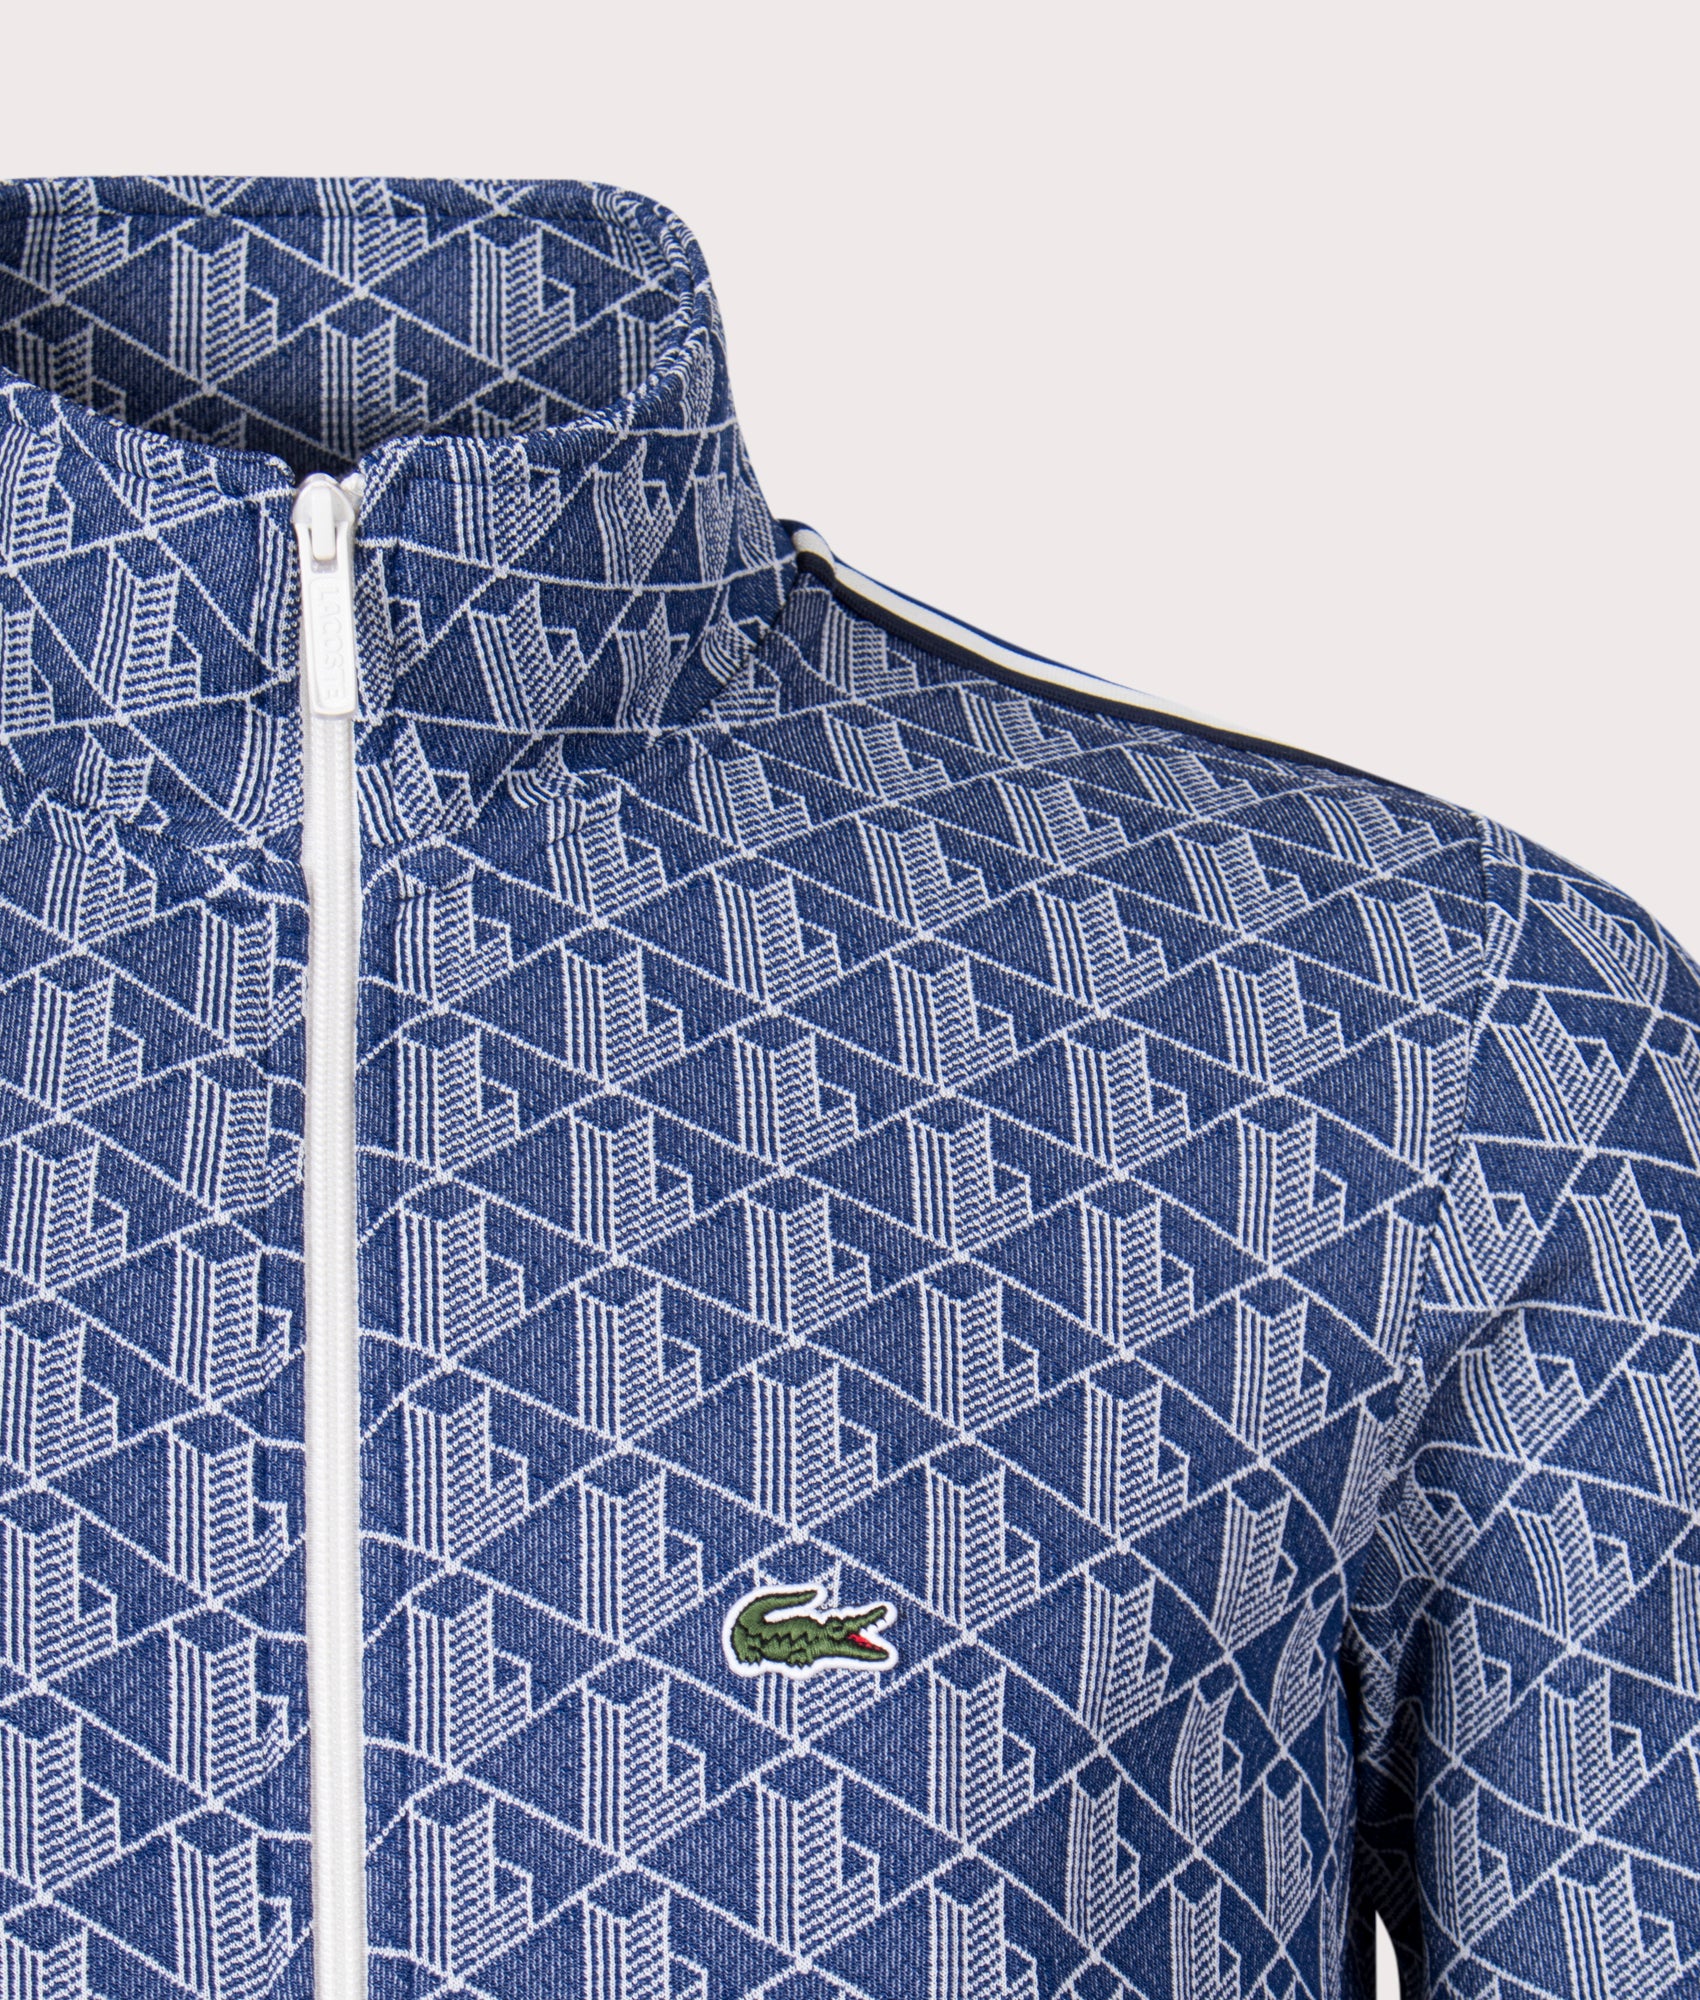 Over Lacoste Track Print Top | | EQVVS Methylene/Flour in All